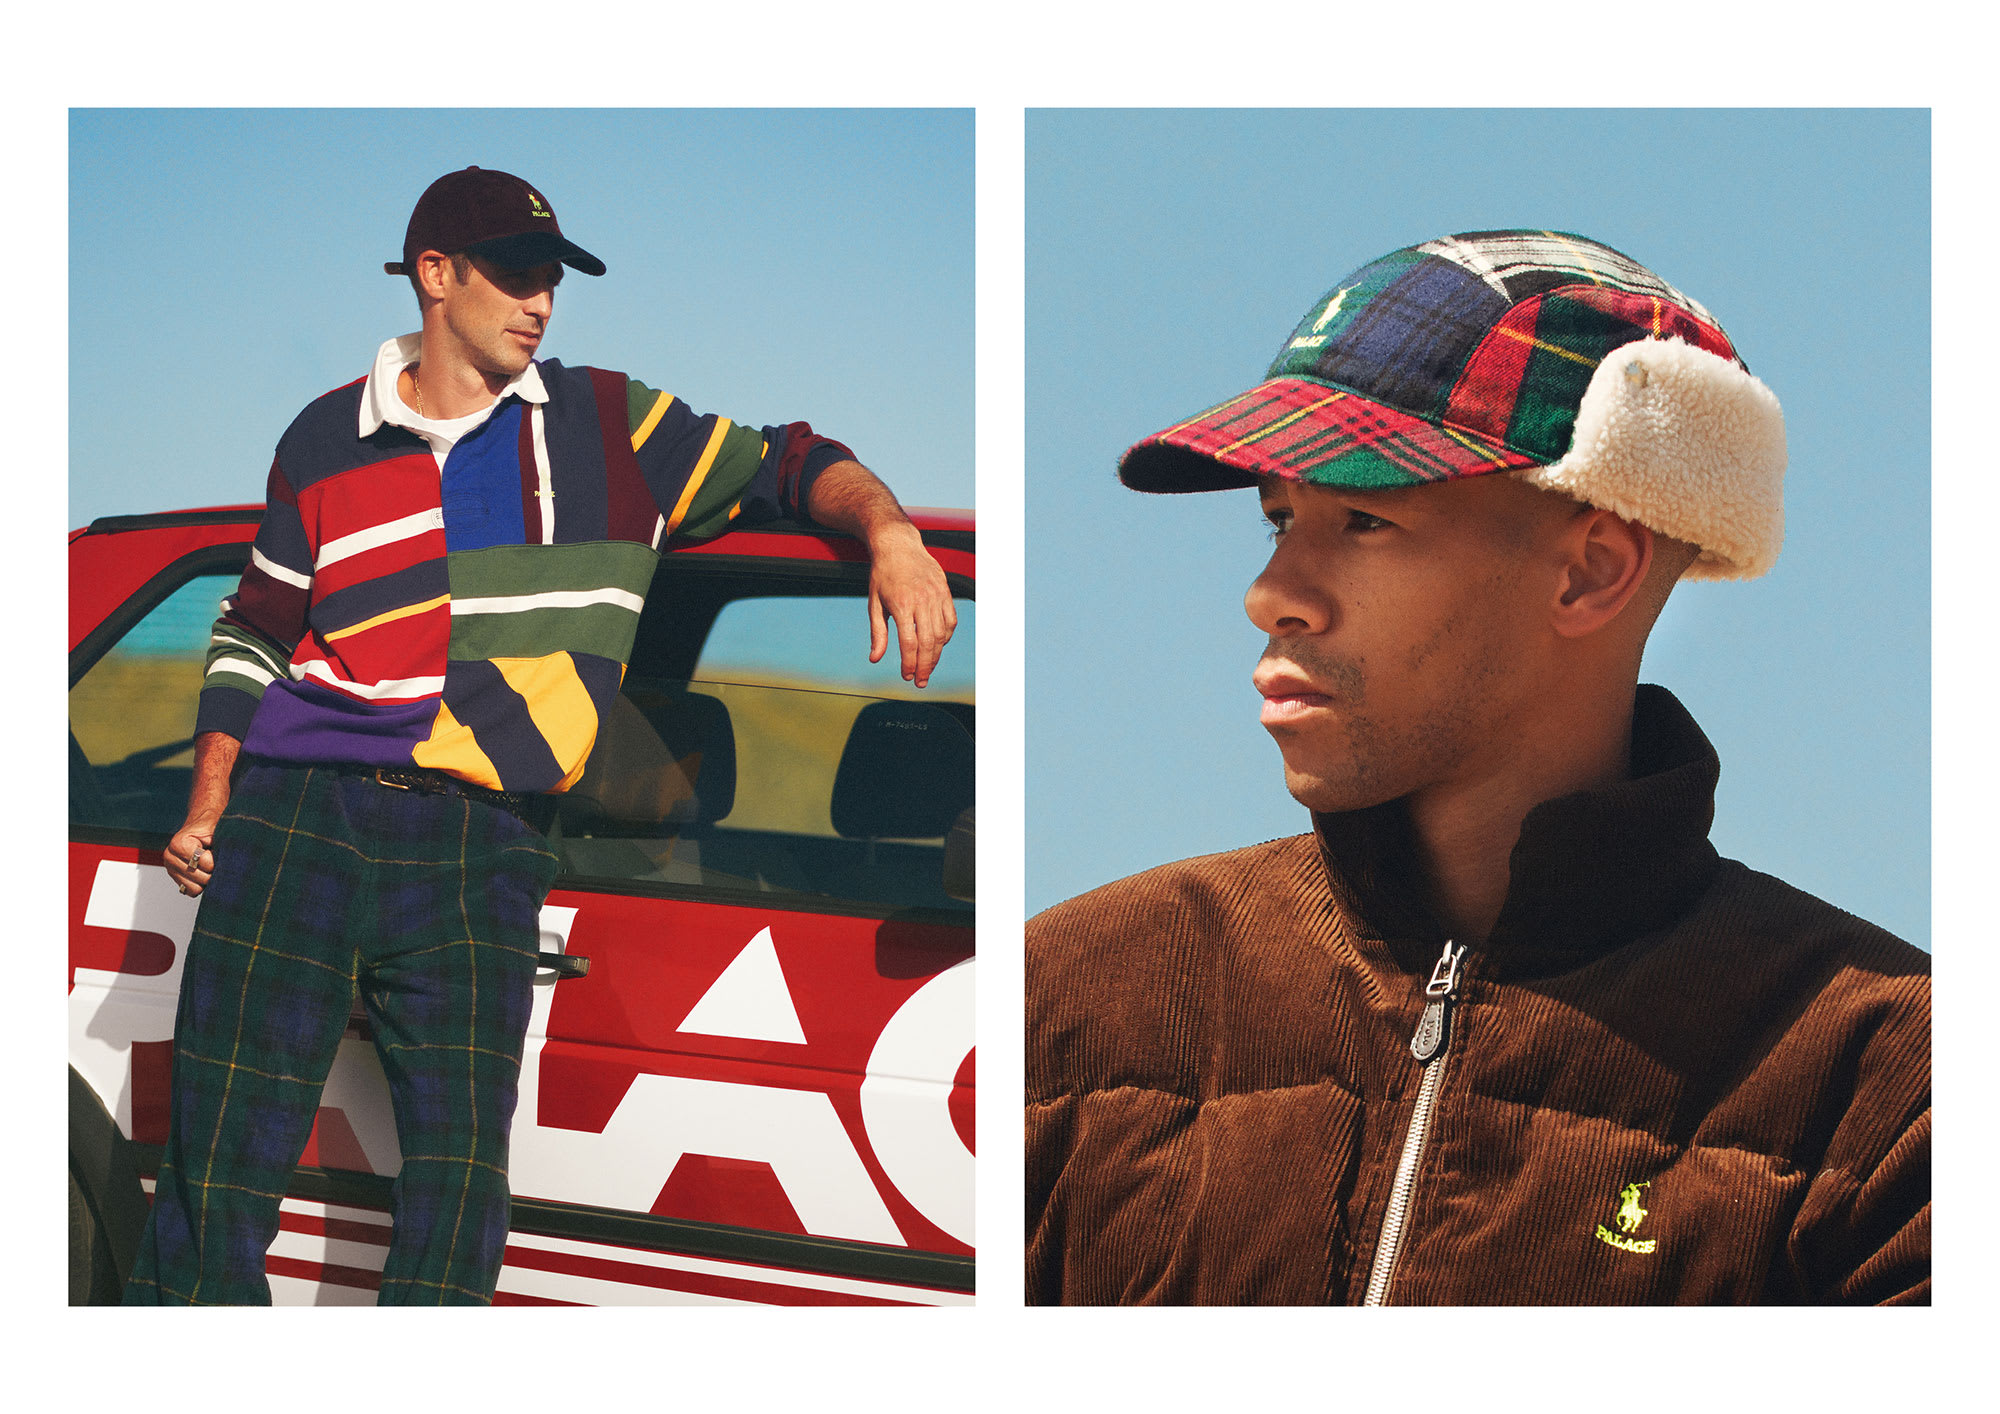 polo and palace collab